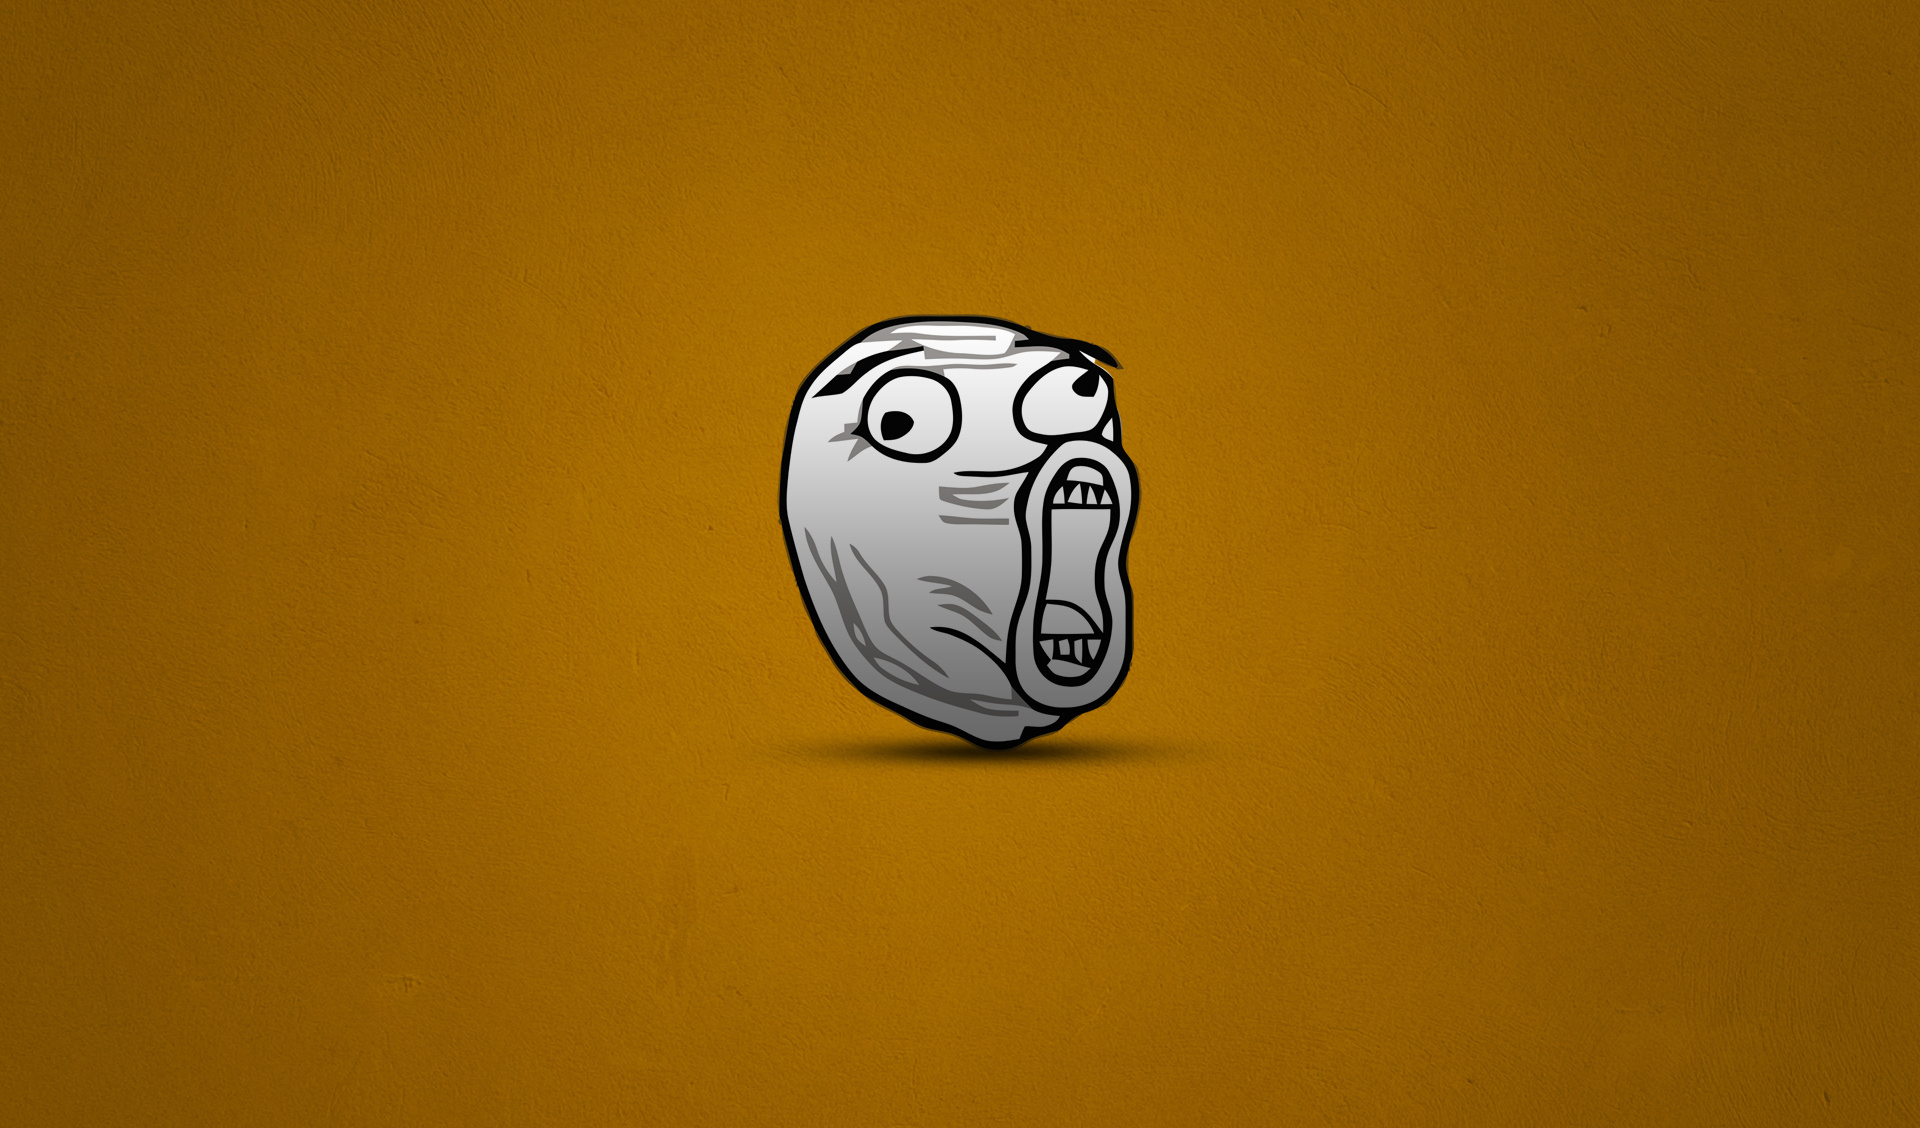 Trollface Wallpapers / Find the best troll face wallpapers on getwallpapers...